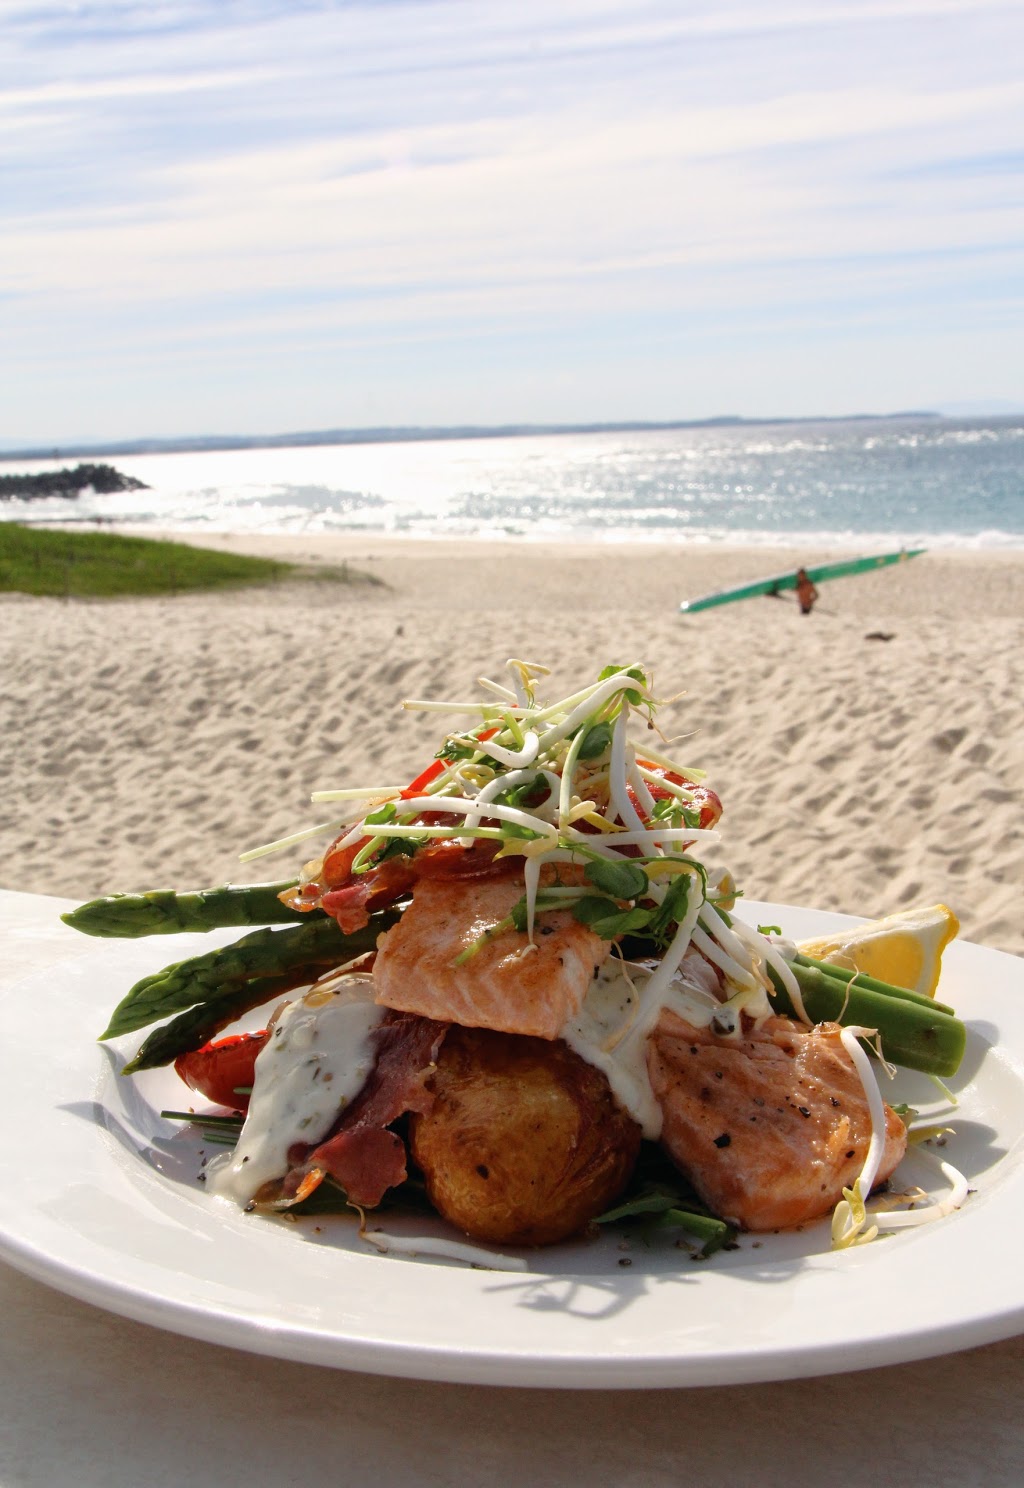 Beach Bums Cafe | cafe | Beach St & North Street, Forster NSW 2428, Australia | 0265552840 OR +61 2 6555 2840